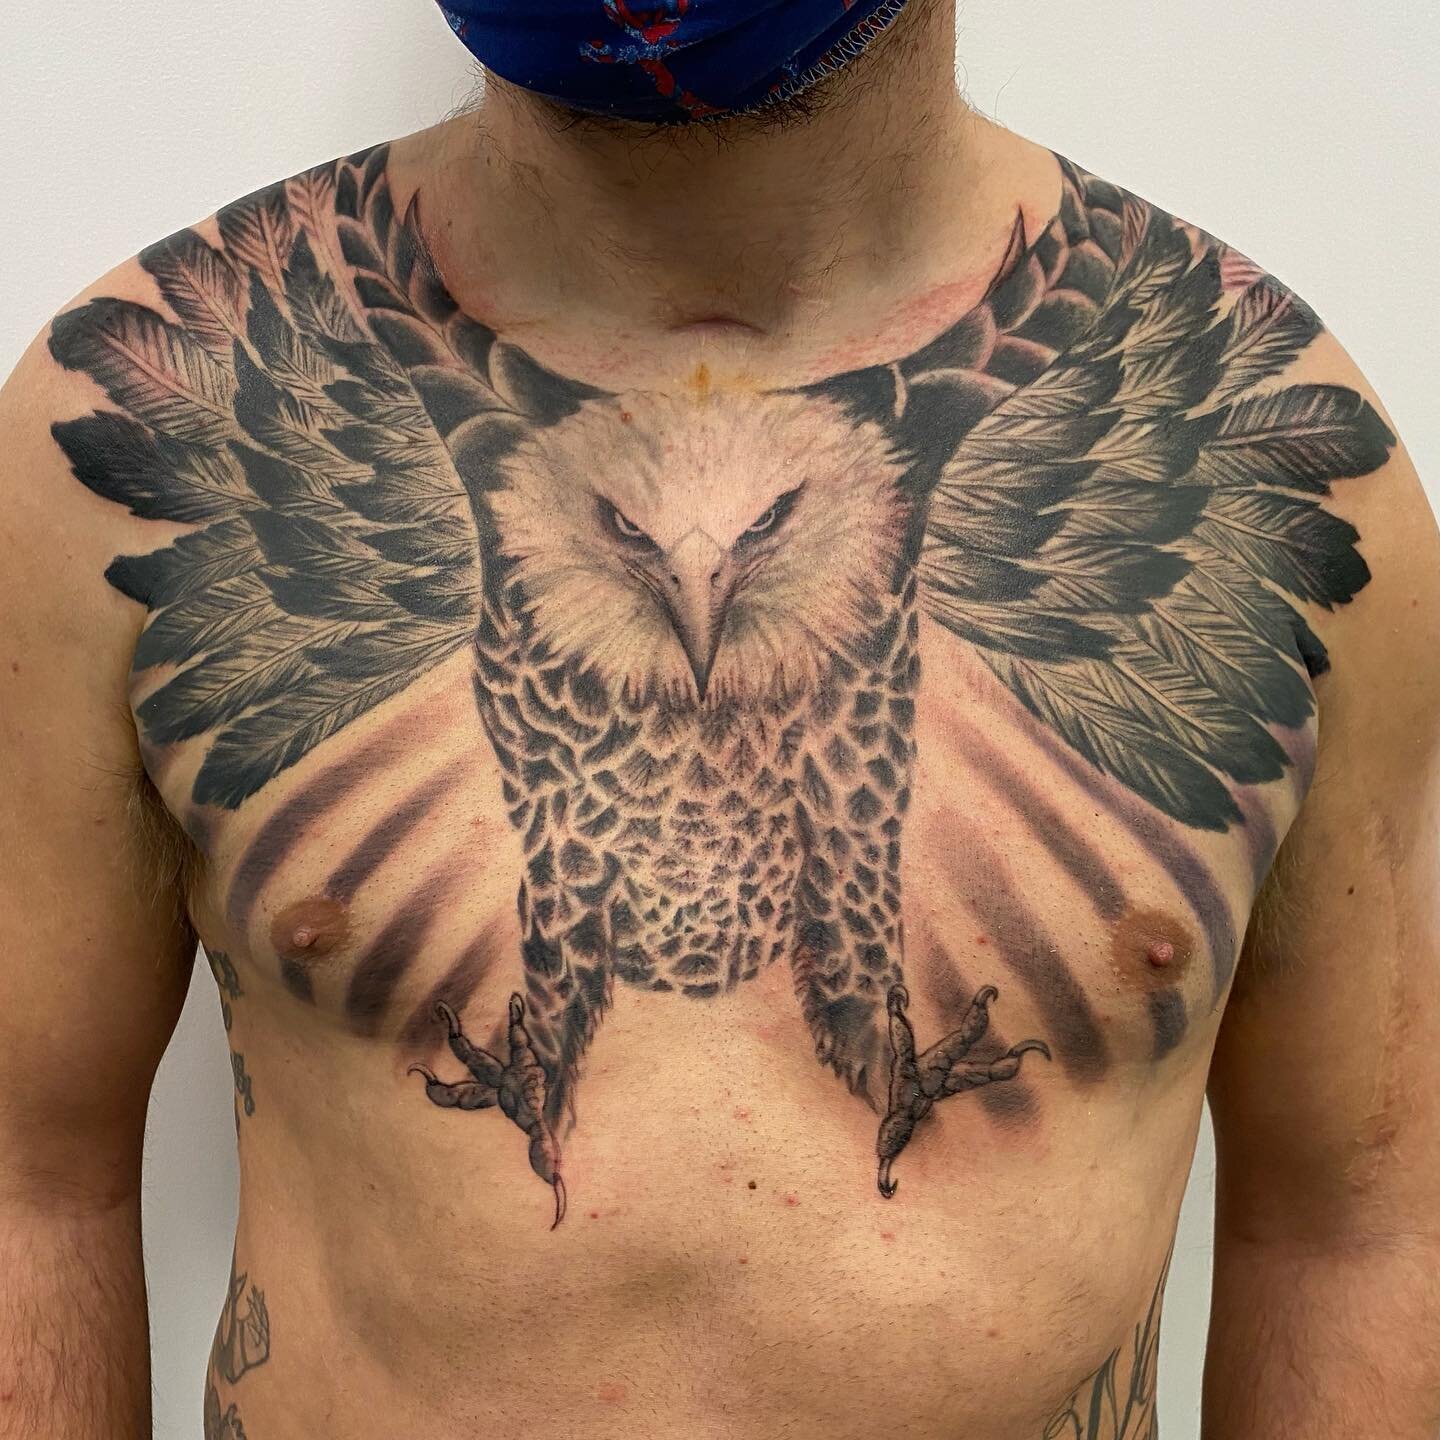 Work in progress on one of my closest friends. That means I push him through this torture by shit talking his pain tolerance. Got him through a 7 hour first session. The rays are from the second session which shows the healed head and feathers from t